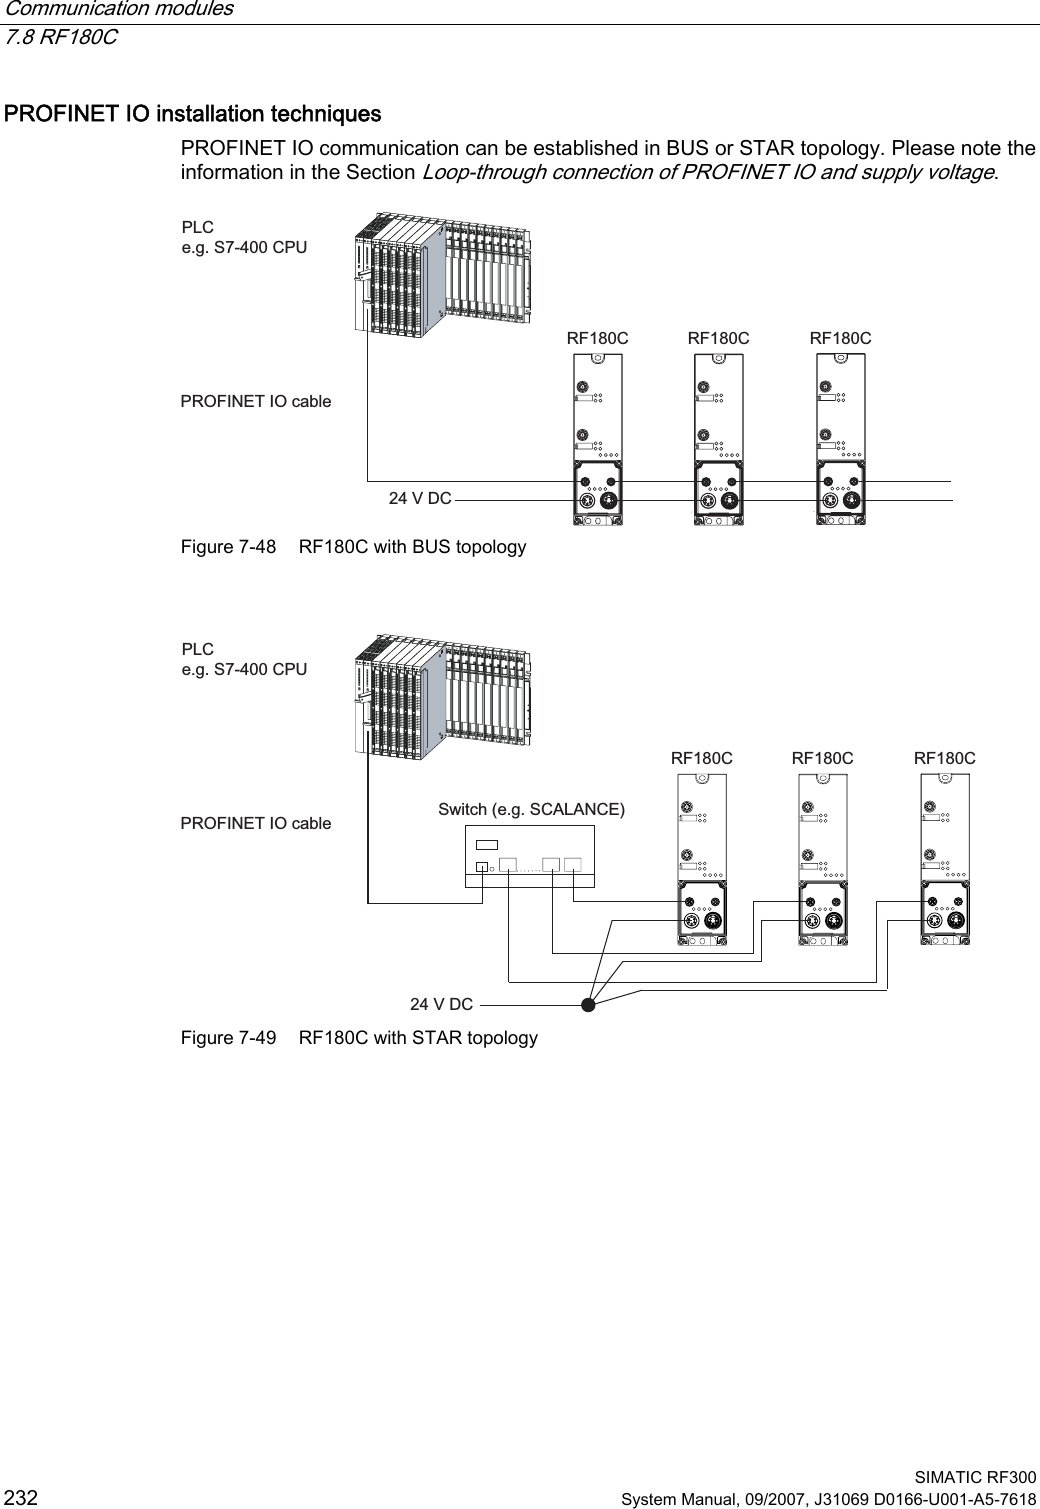 Communication modules   7.8 RF180C  SIMATIC RF300 232 System Manual, 09/2007, J31069 D0166-U001-A5-7618 PROFINET IO installation techniques PROFINET IO communication can be established in BUS or STAR topology. Please note the information in the Section Loop-through connection of PROFINET IO and supply voltage. 3/&amp;HJ6&amp;38352),1(7,2FDEOH9&apos;&amp;5)&amp; 5)&amp; 5)&amp; Figure 7-48  RF180C with BUS topology  3/&amp;HJ6&amp;38352),1(7,2FDEOH9&apos;&amp;6ZLWFKHJ6&amp;$/$1&amp;(5)&amp; 5)&amp; 5)&amp; Figure 7-49  RF180C with STAR topology  